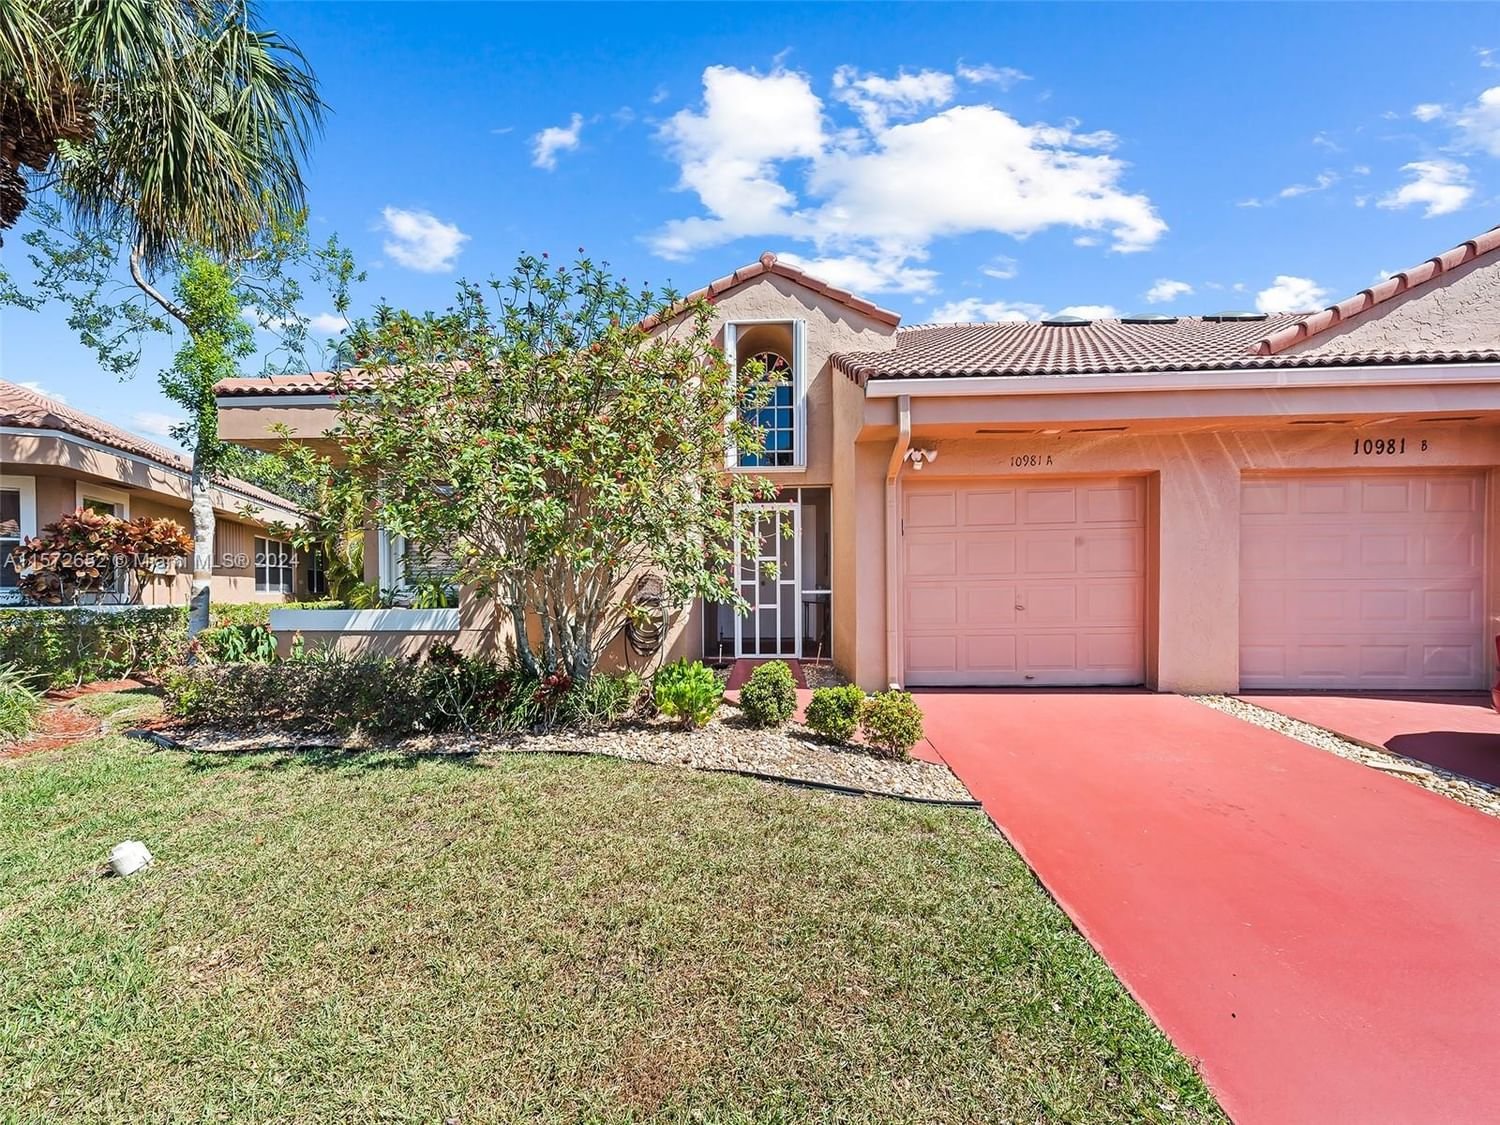 Real estate property located at 10981 Ladera Ln A, Palm Beach County, SWEETWATER SEC 1, Boca Raton, FL